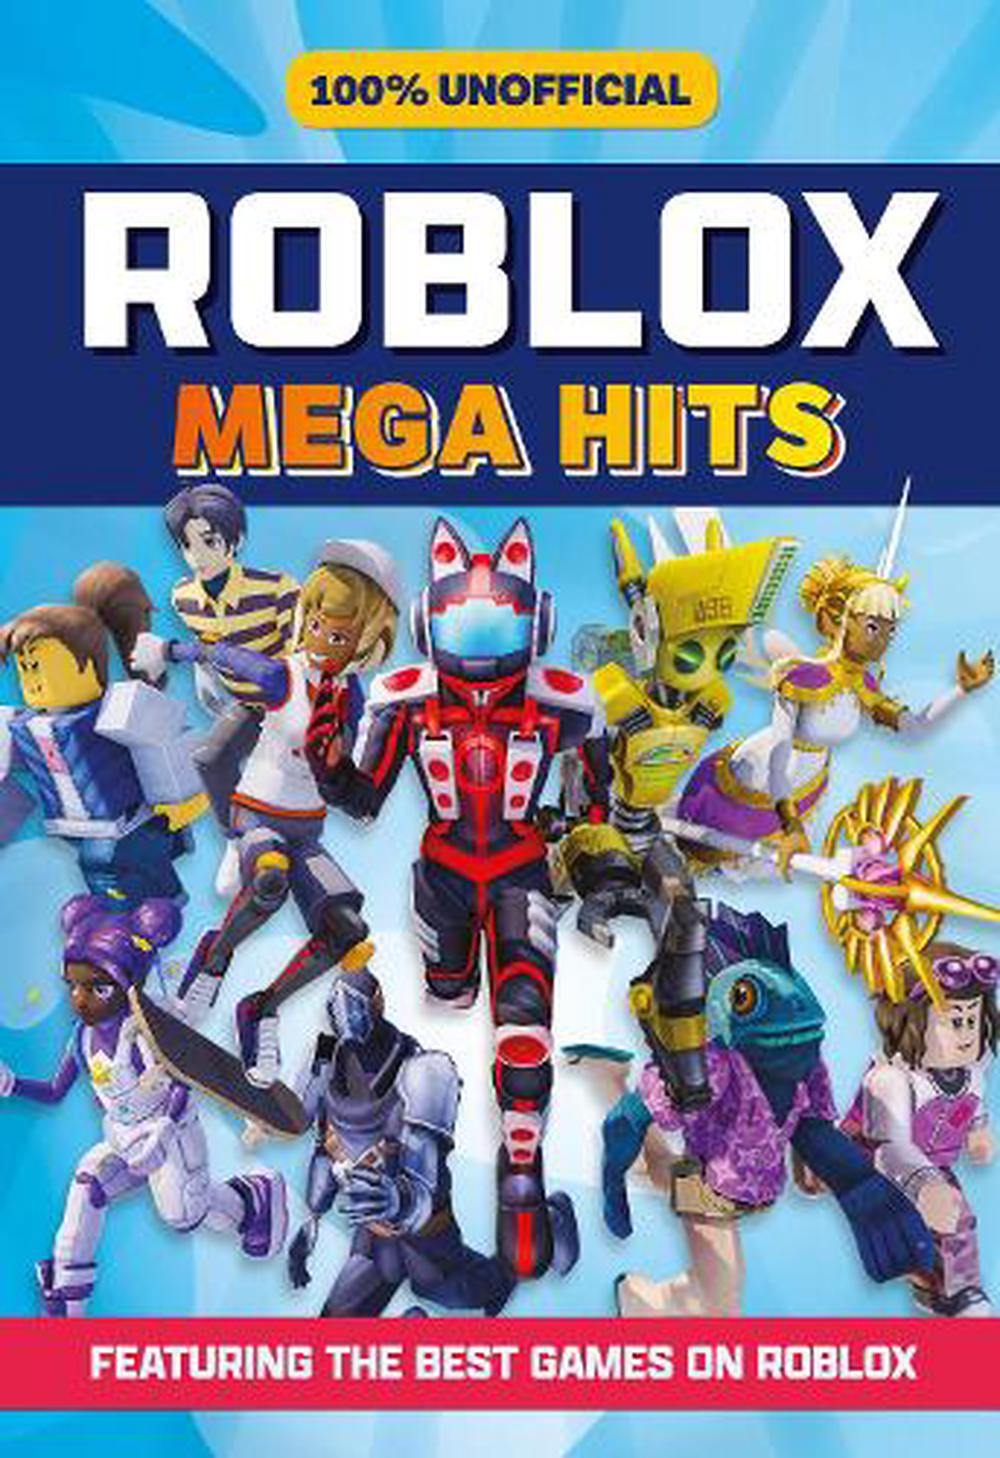 Unofficial Roblox Game Guide By Roblox Hardcover 9780755502639 Buy